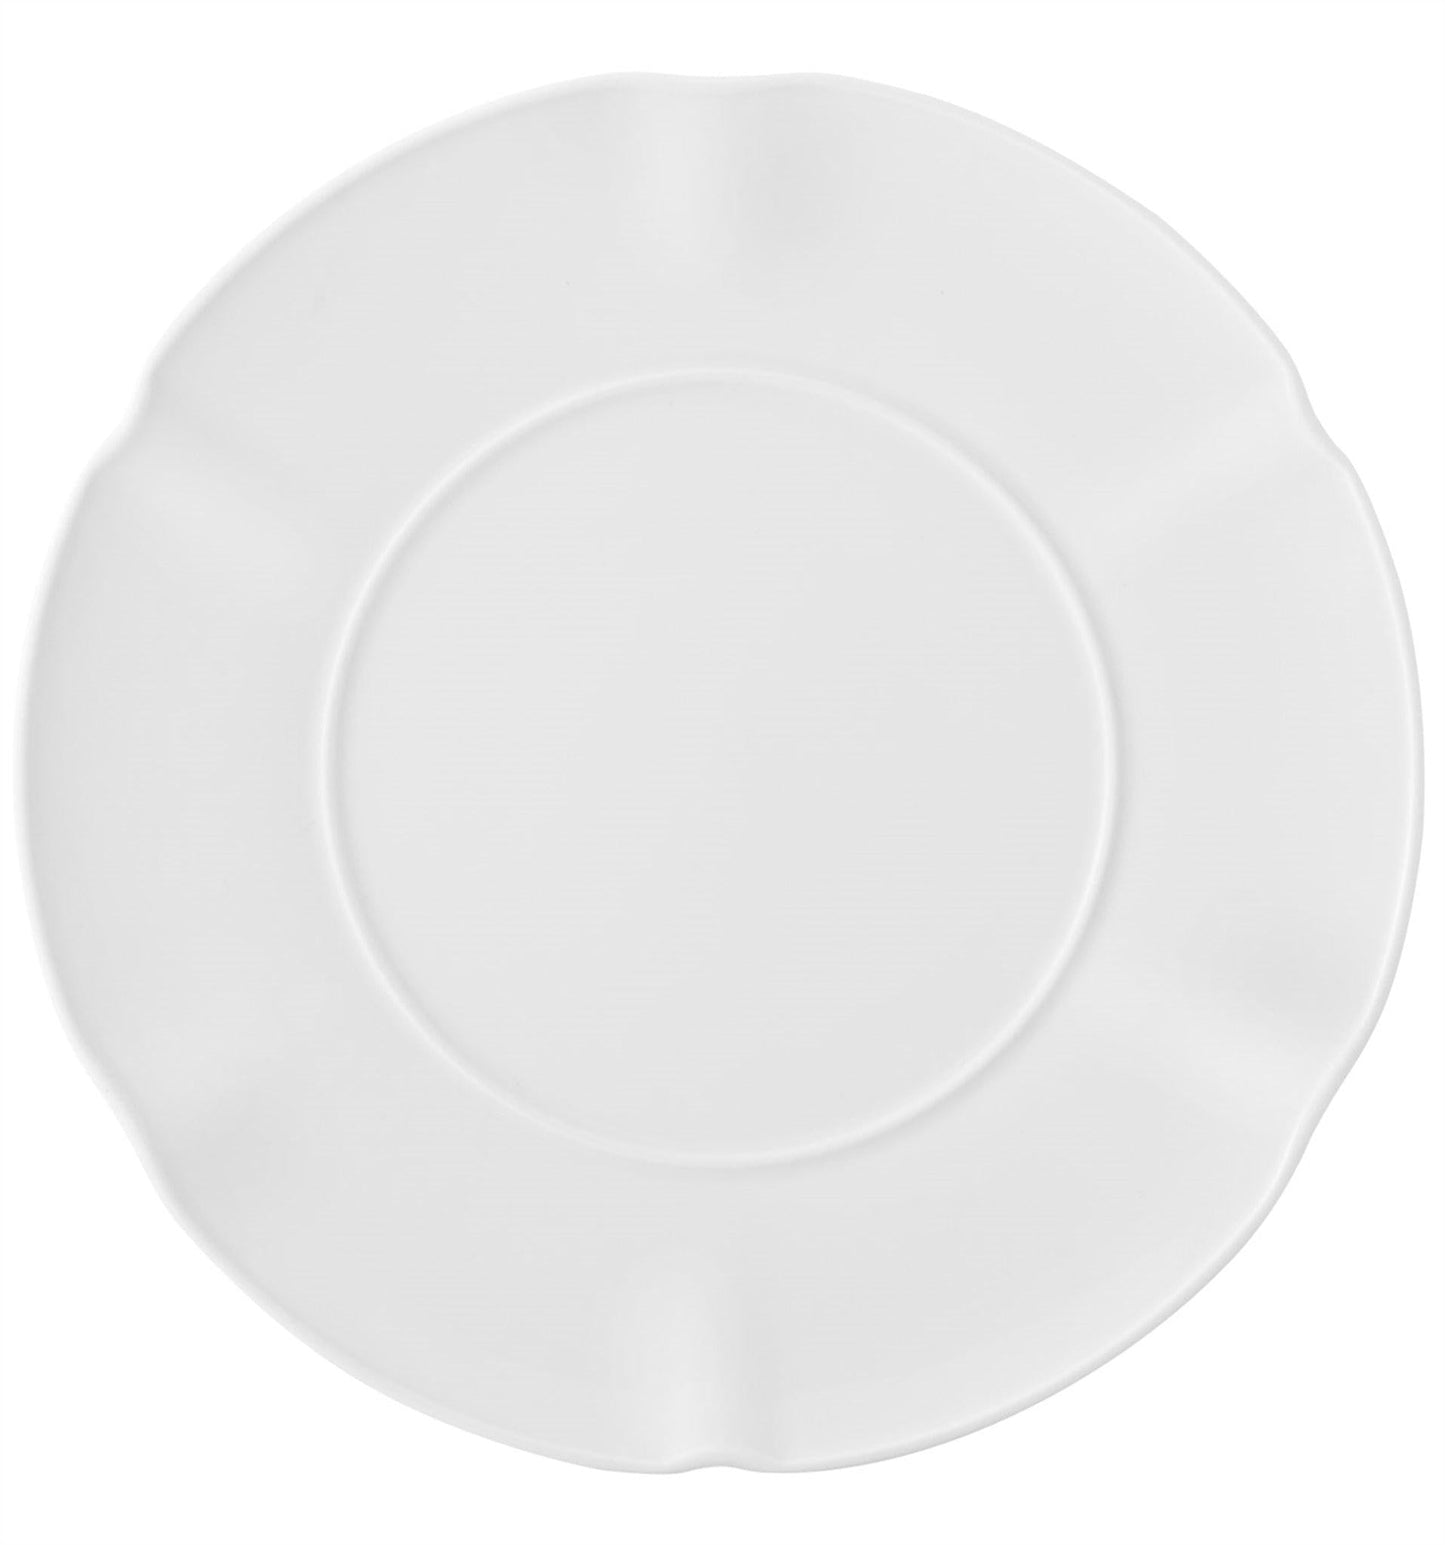 Crown White - Bread & Butter Plate (4 plates) - LAZADO